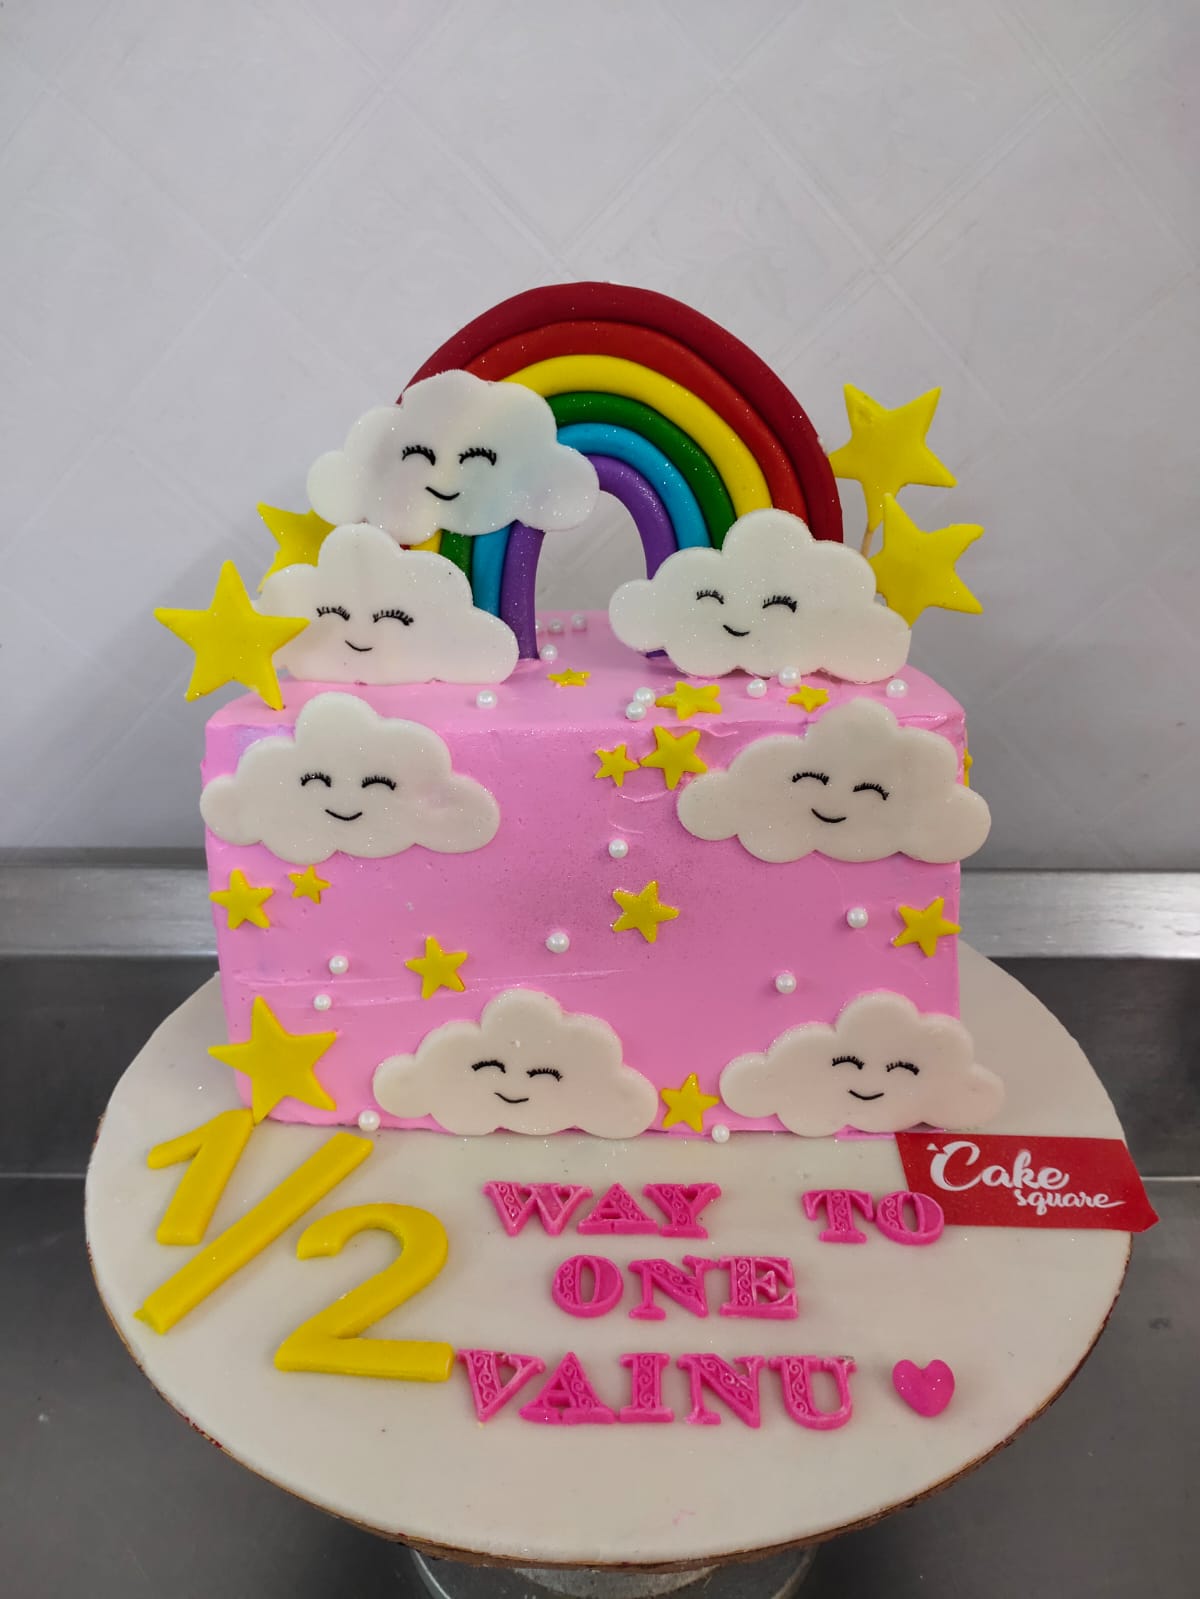 Baby Theme Cake For Home Coming | 6 Month Birthday Cake |Customised Cakes  in Chennai | - Cake Square Chennai | Cake Shop in Chennai